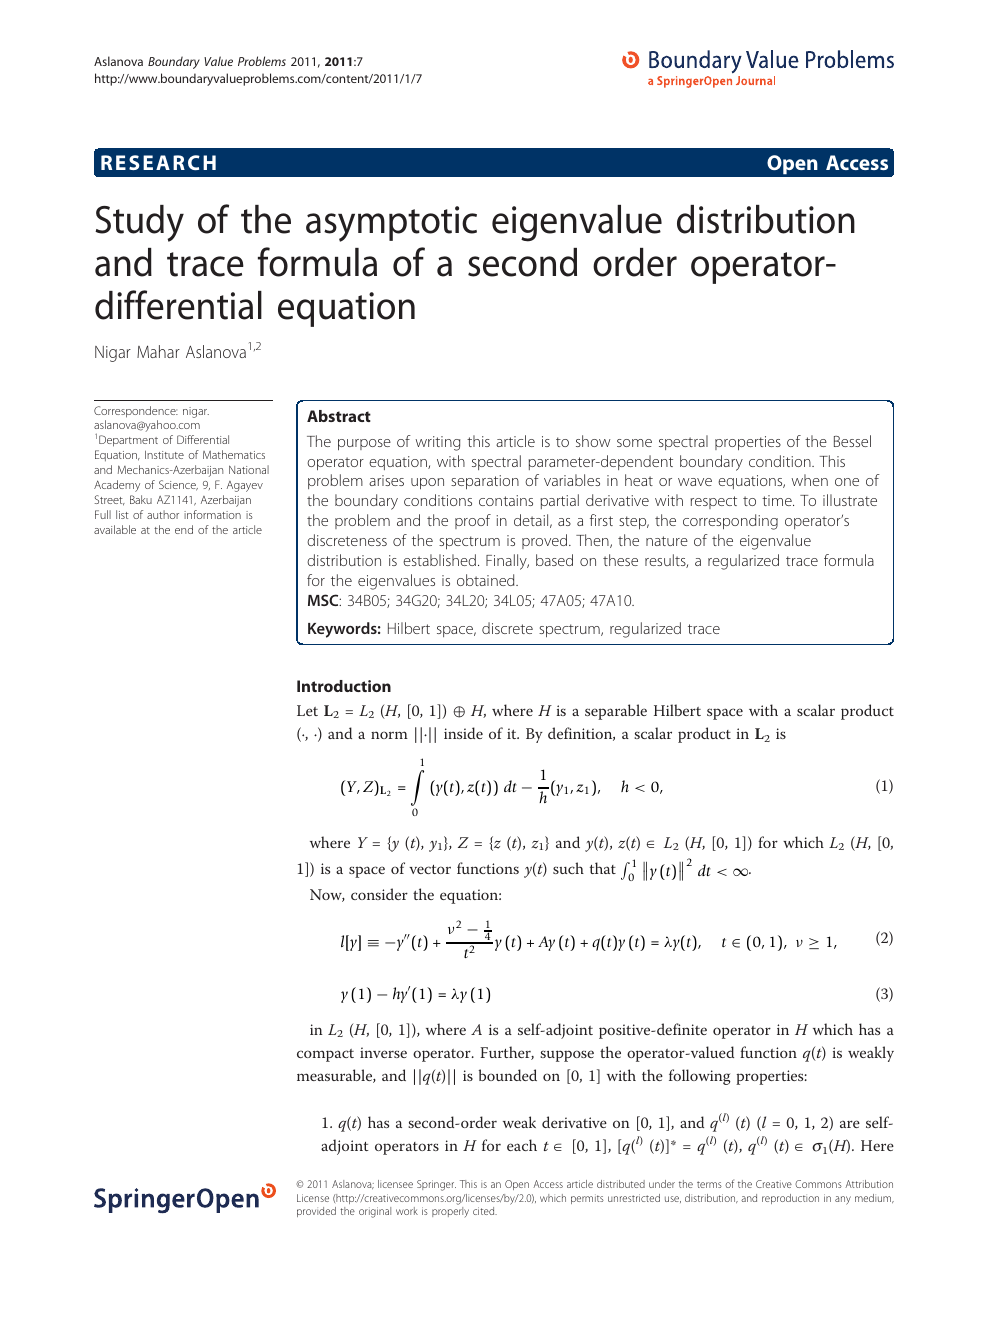 Study Of The Asymptotic Eigenvalue Distribution And Trace Formula Of A Second Order Operator Differential Equation Topic Of Research Paper In Mathematics Download Scholarly Article Pdf And Read For Free On Cyberleninka